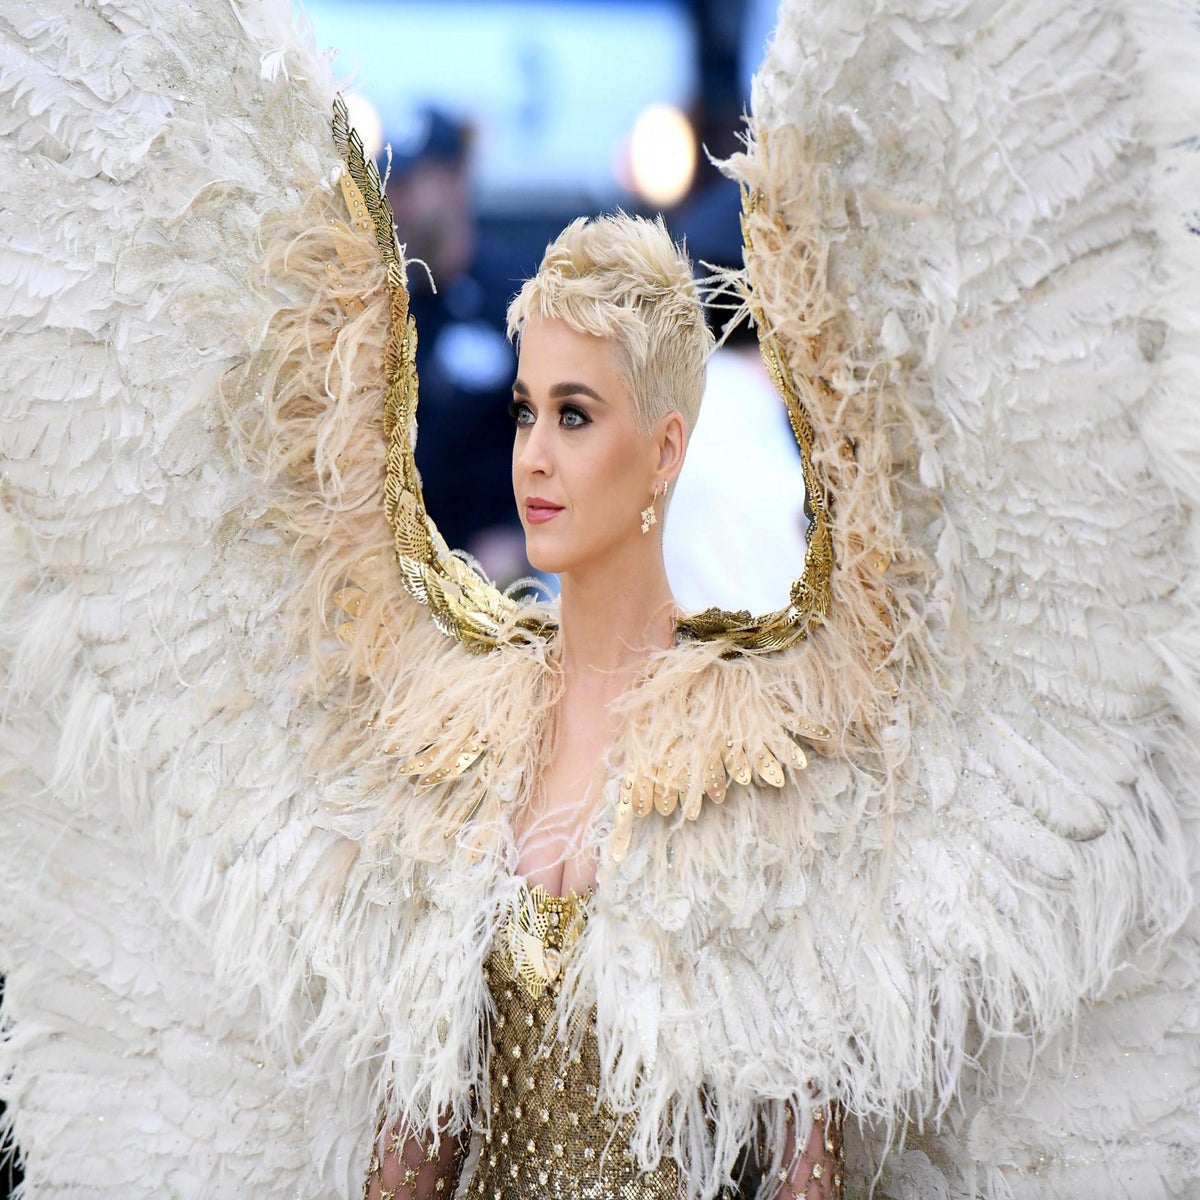 Katy Perry shares outfit she would have worn for Met Gala 2020 to